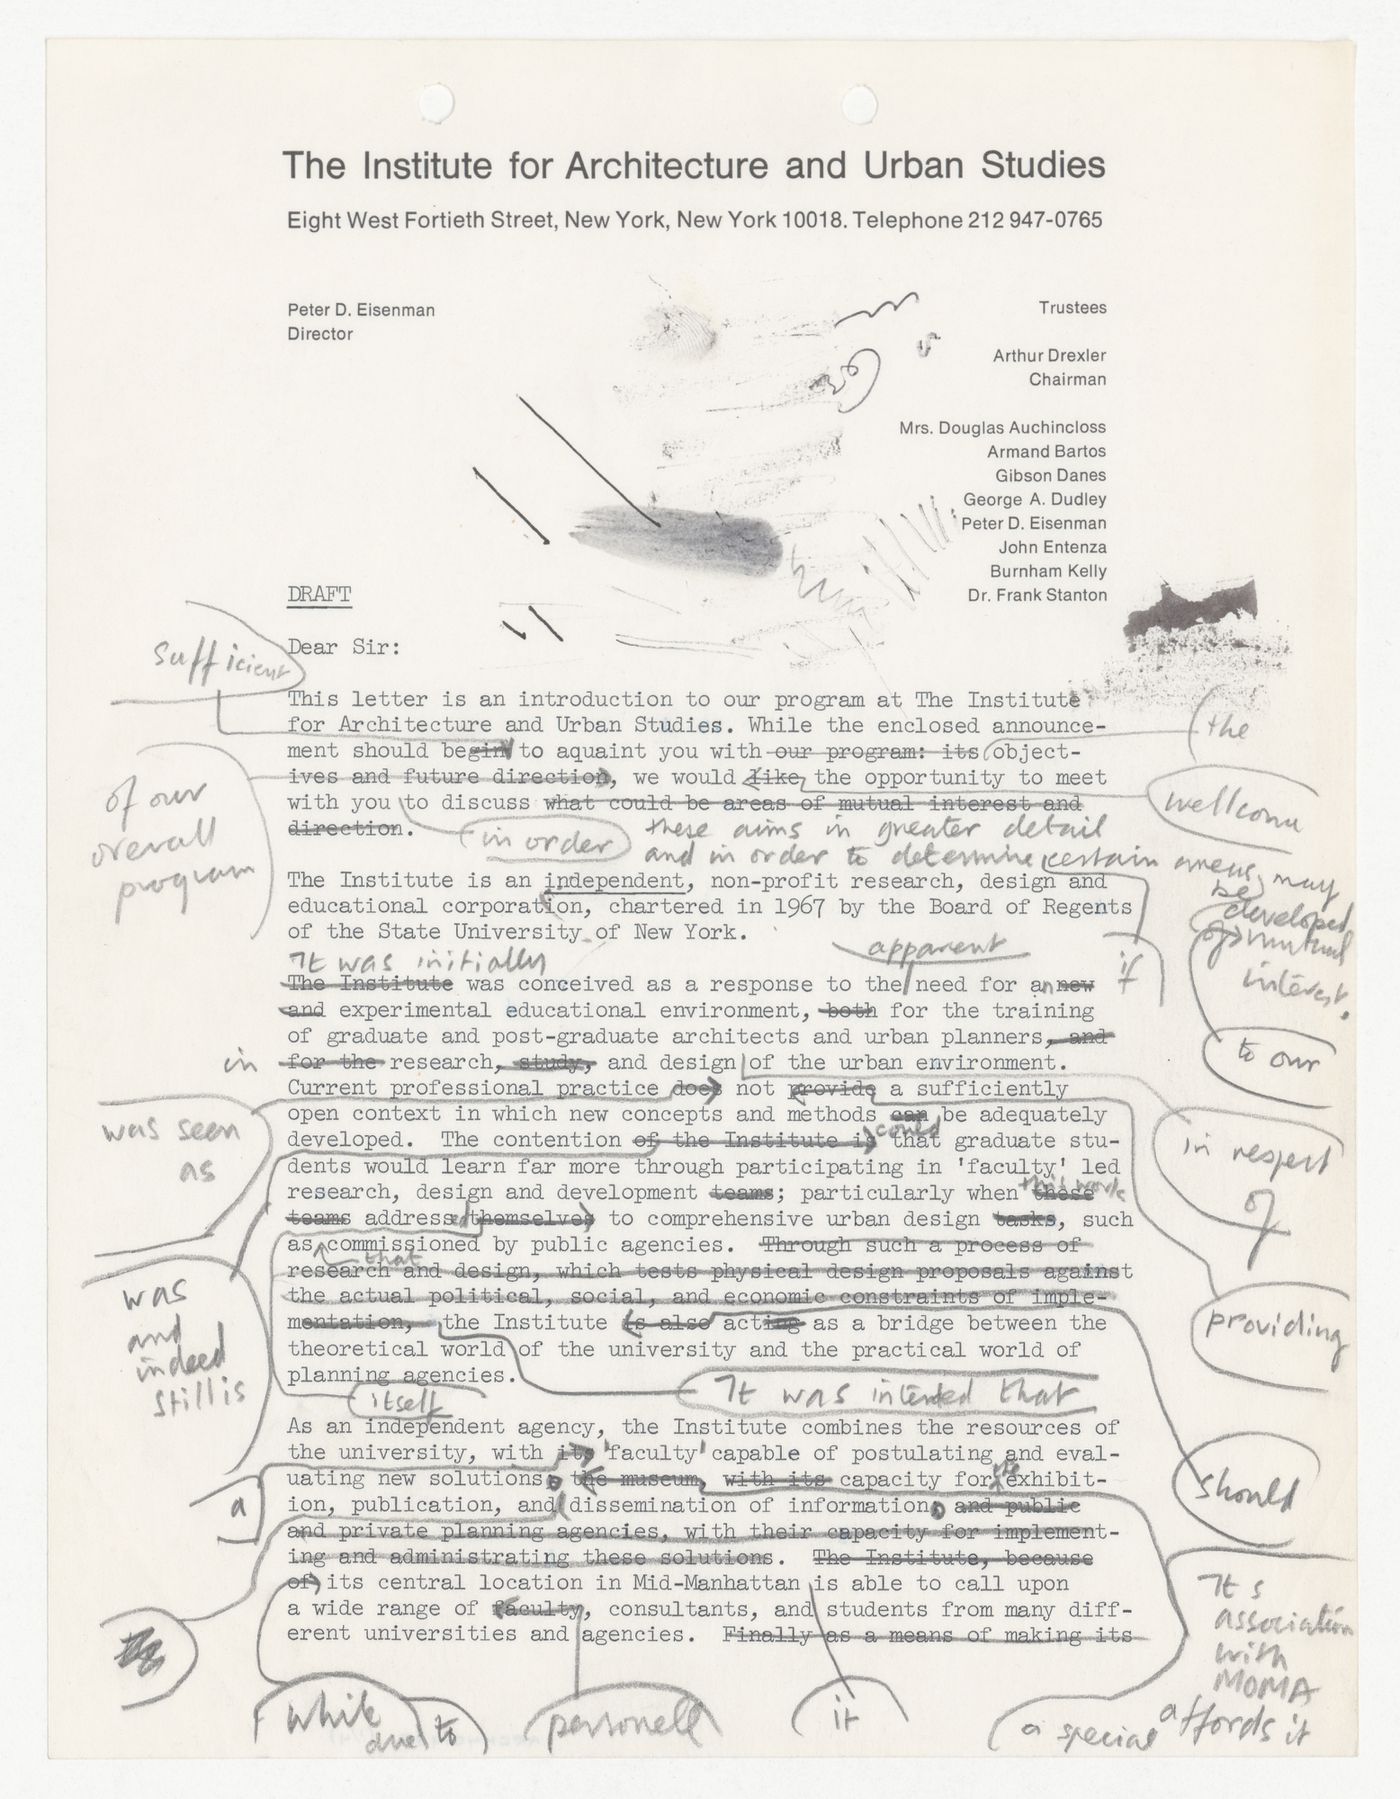 Draft letter for requesting donations including a brief overview of IAUS history and projects written by Peter D. Eisenman with corrections and annotations